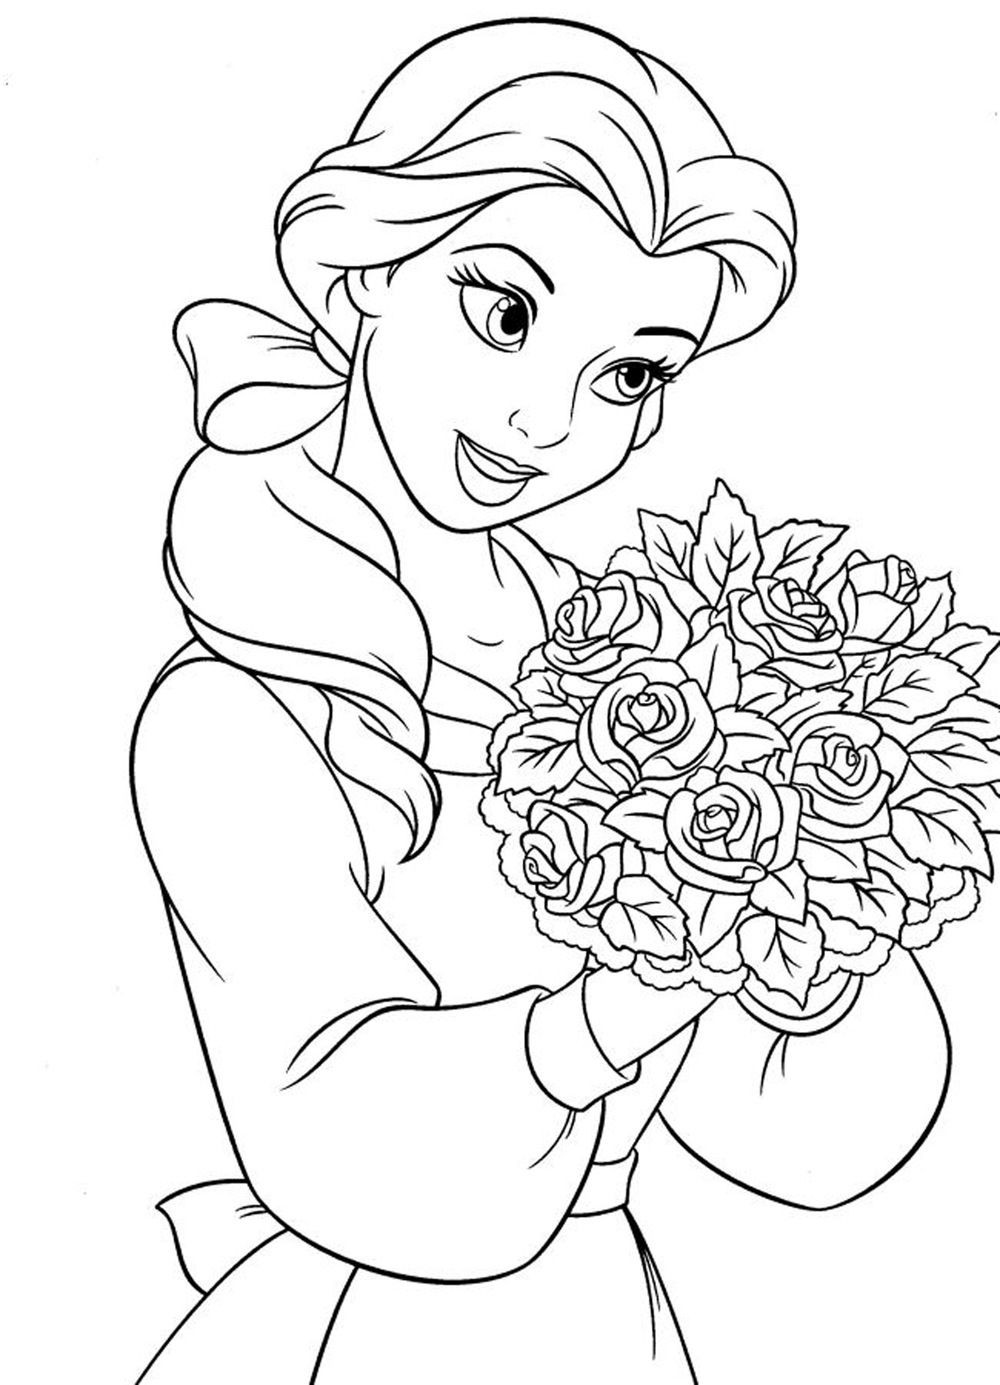 Disney Coloring Pages For Girls
 princess coloring pages for girls Free